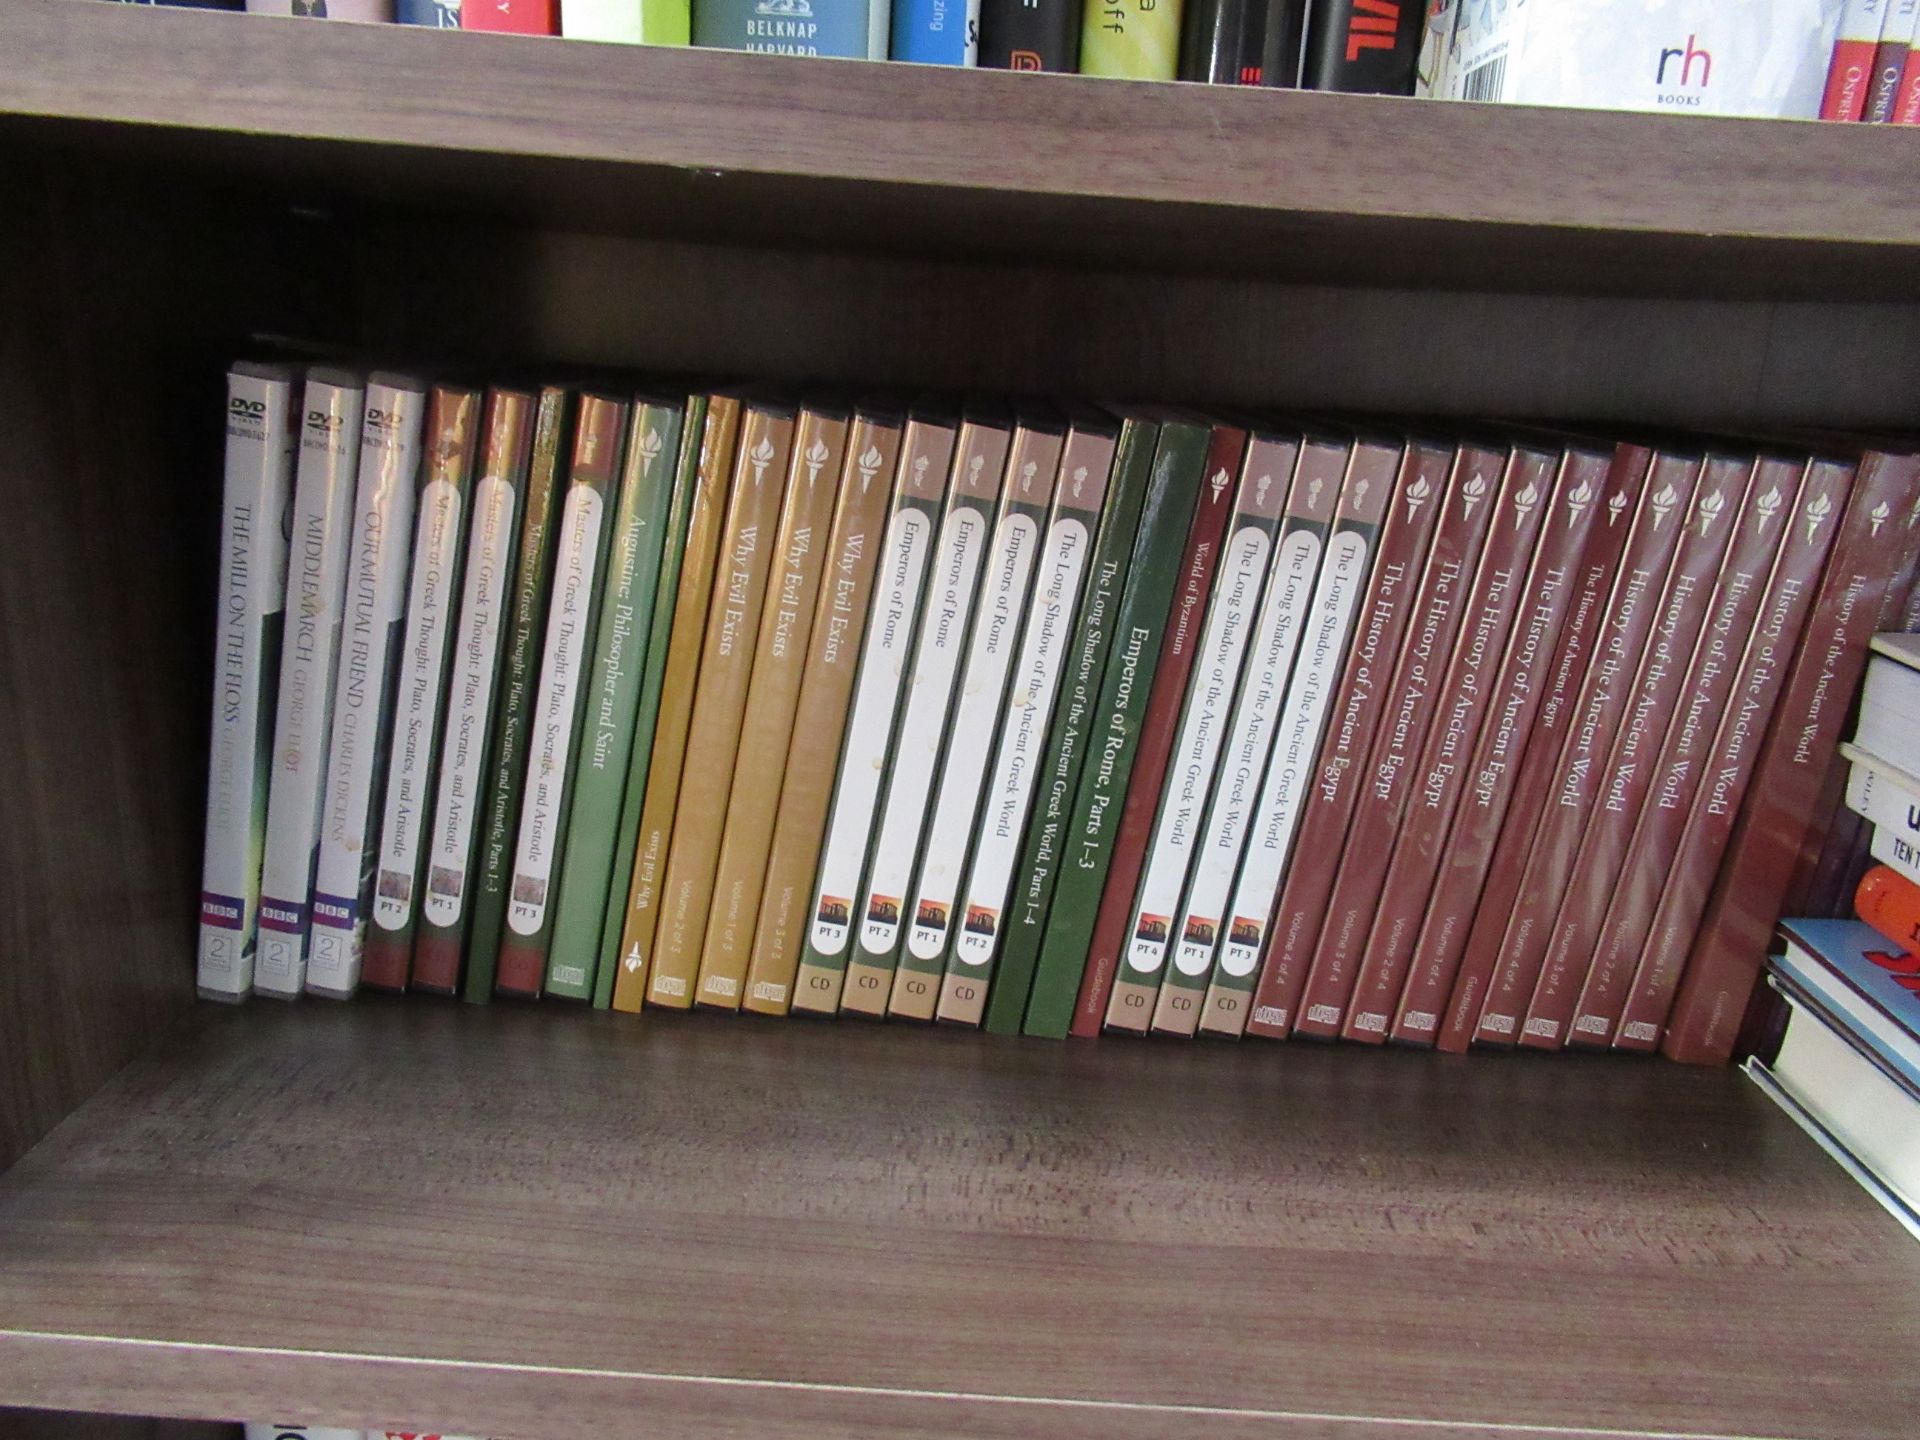 3x Bookcases and contents of various themes and subjects including religion, finance, politics and t - Image 18 of 21